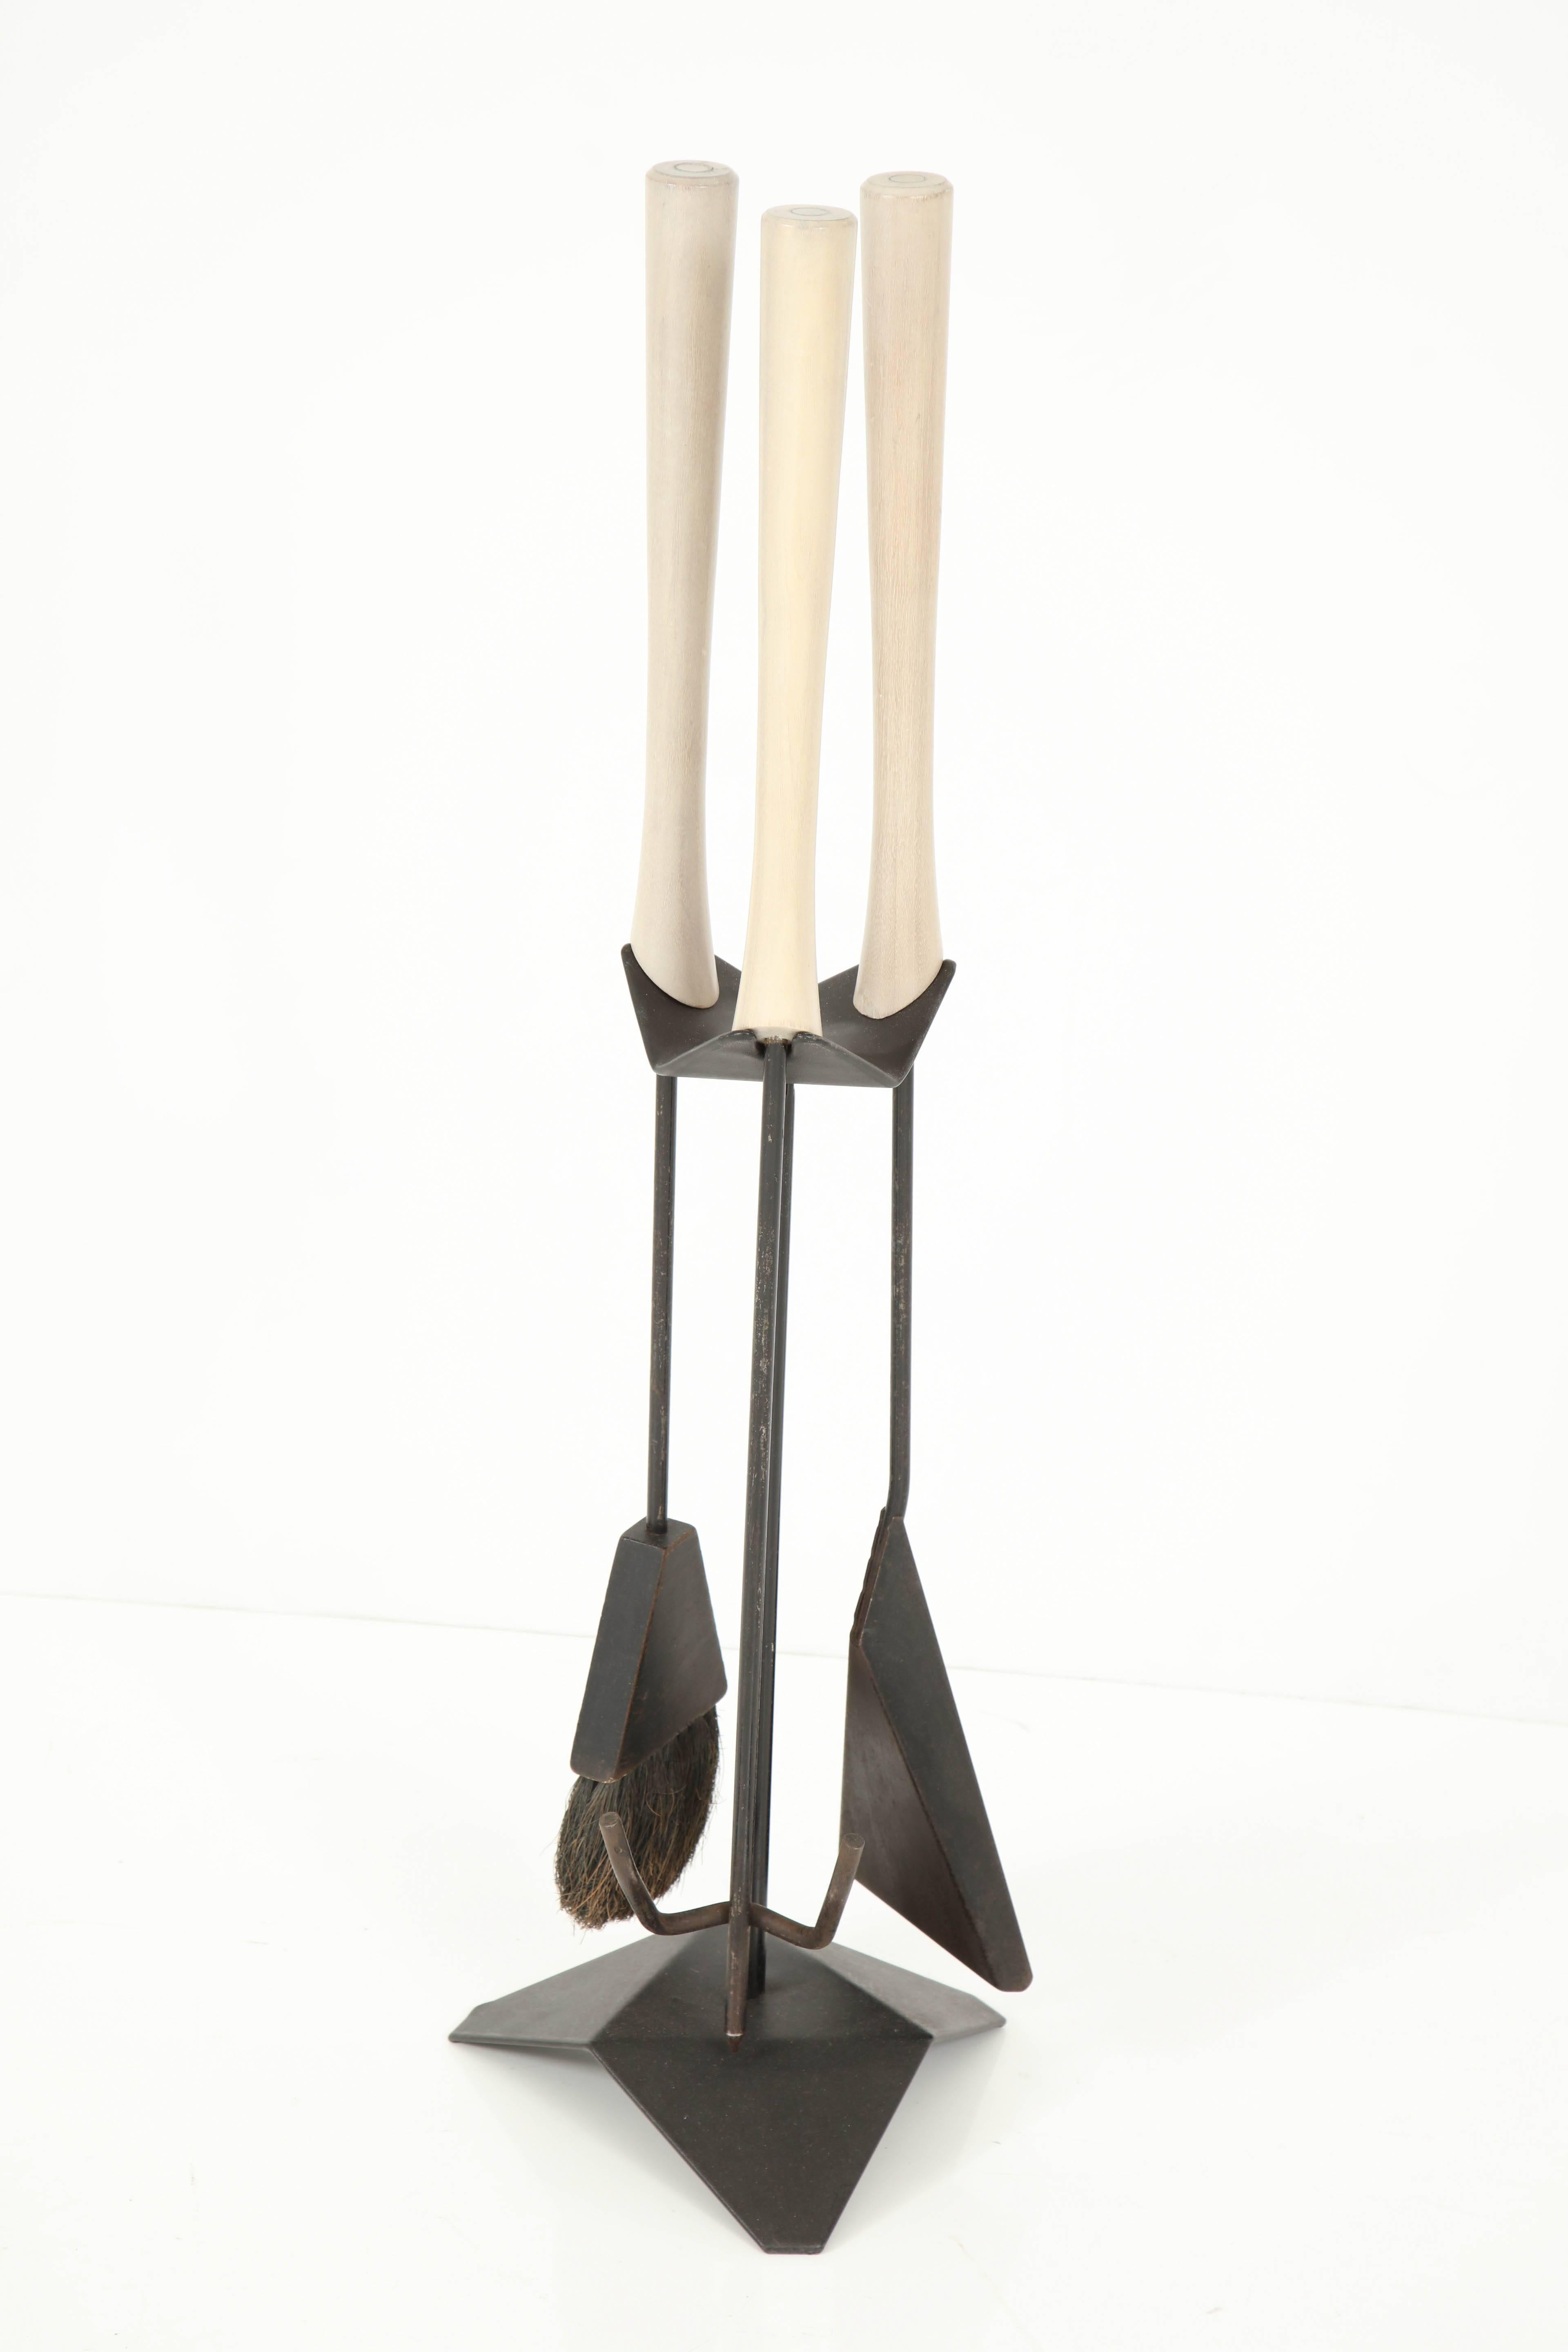 Set of Modernist fireplace tools in iron with whitewashed maple handles, circa 1960.